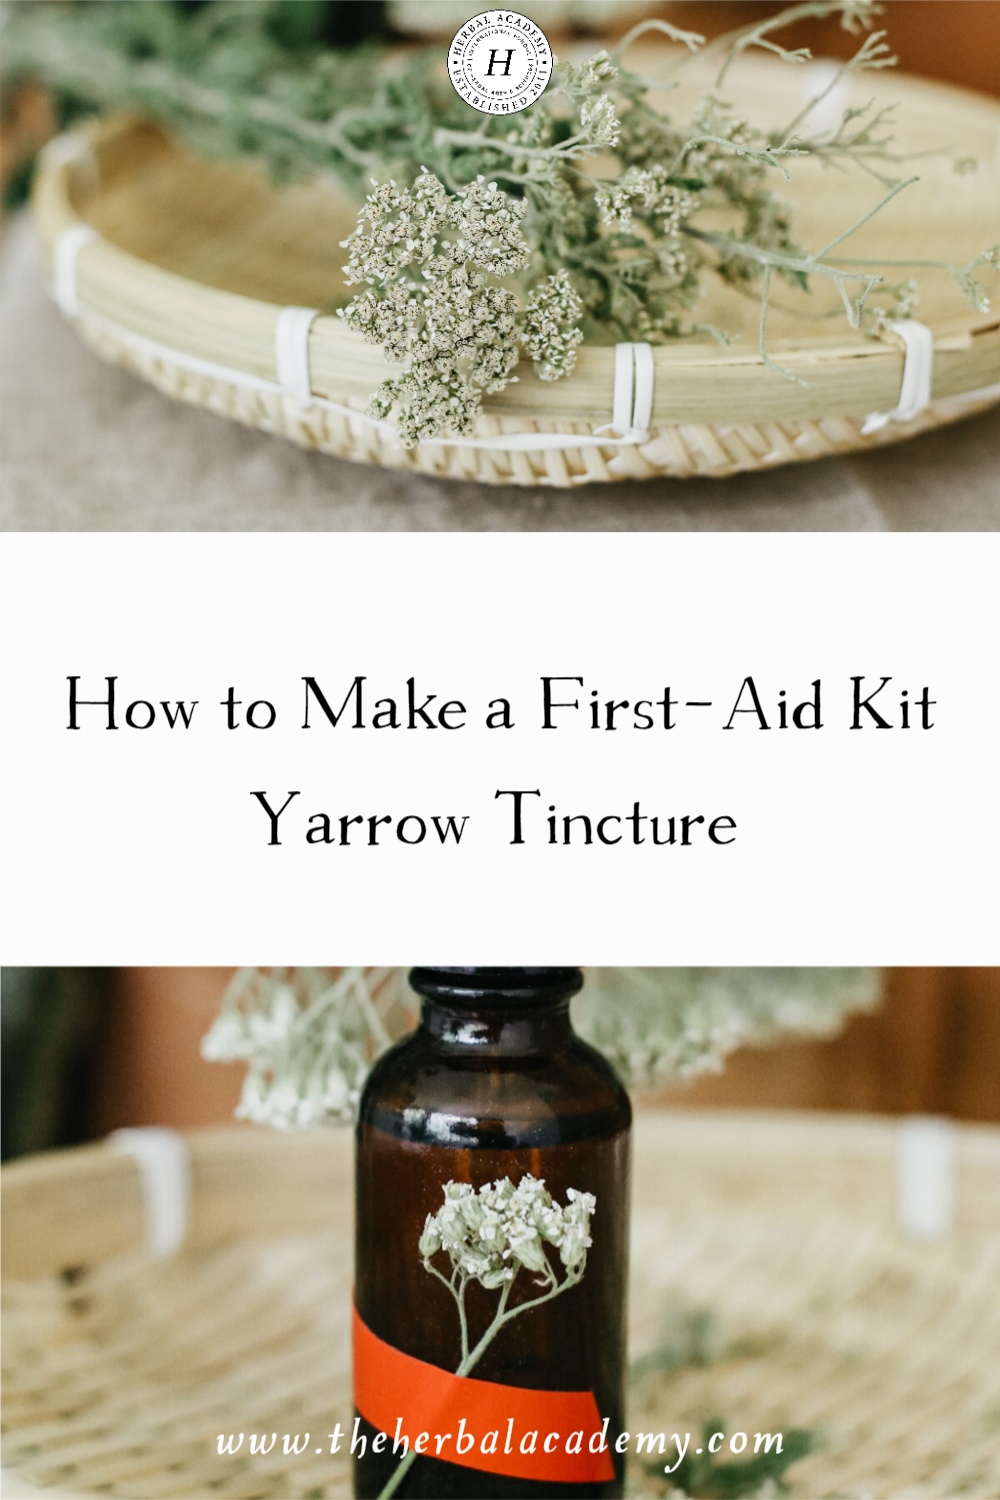 How to Make a First-Aid Kit Yarrow Tincture | Herbal Academy | Yarrow tincture is a wonderful addition to your first-aid kit to help you be prepared for any unfortunate bump in your herbal adventures!